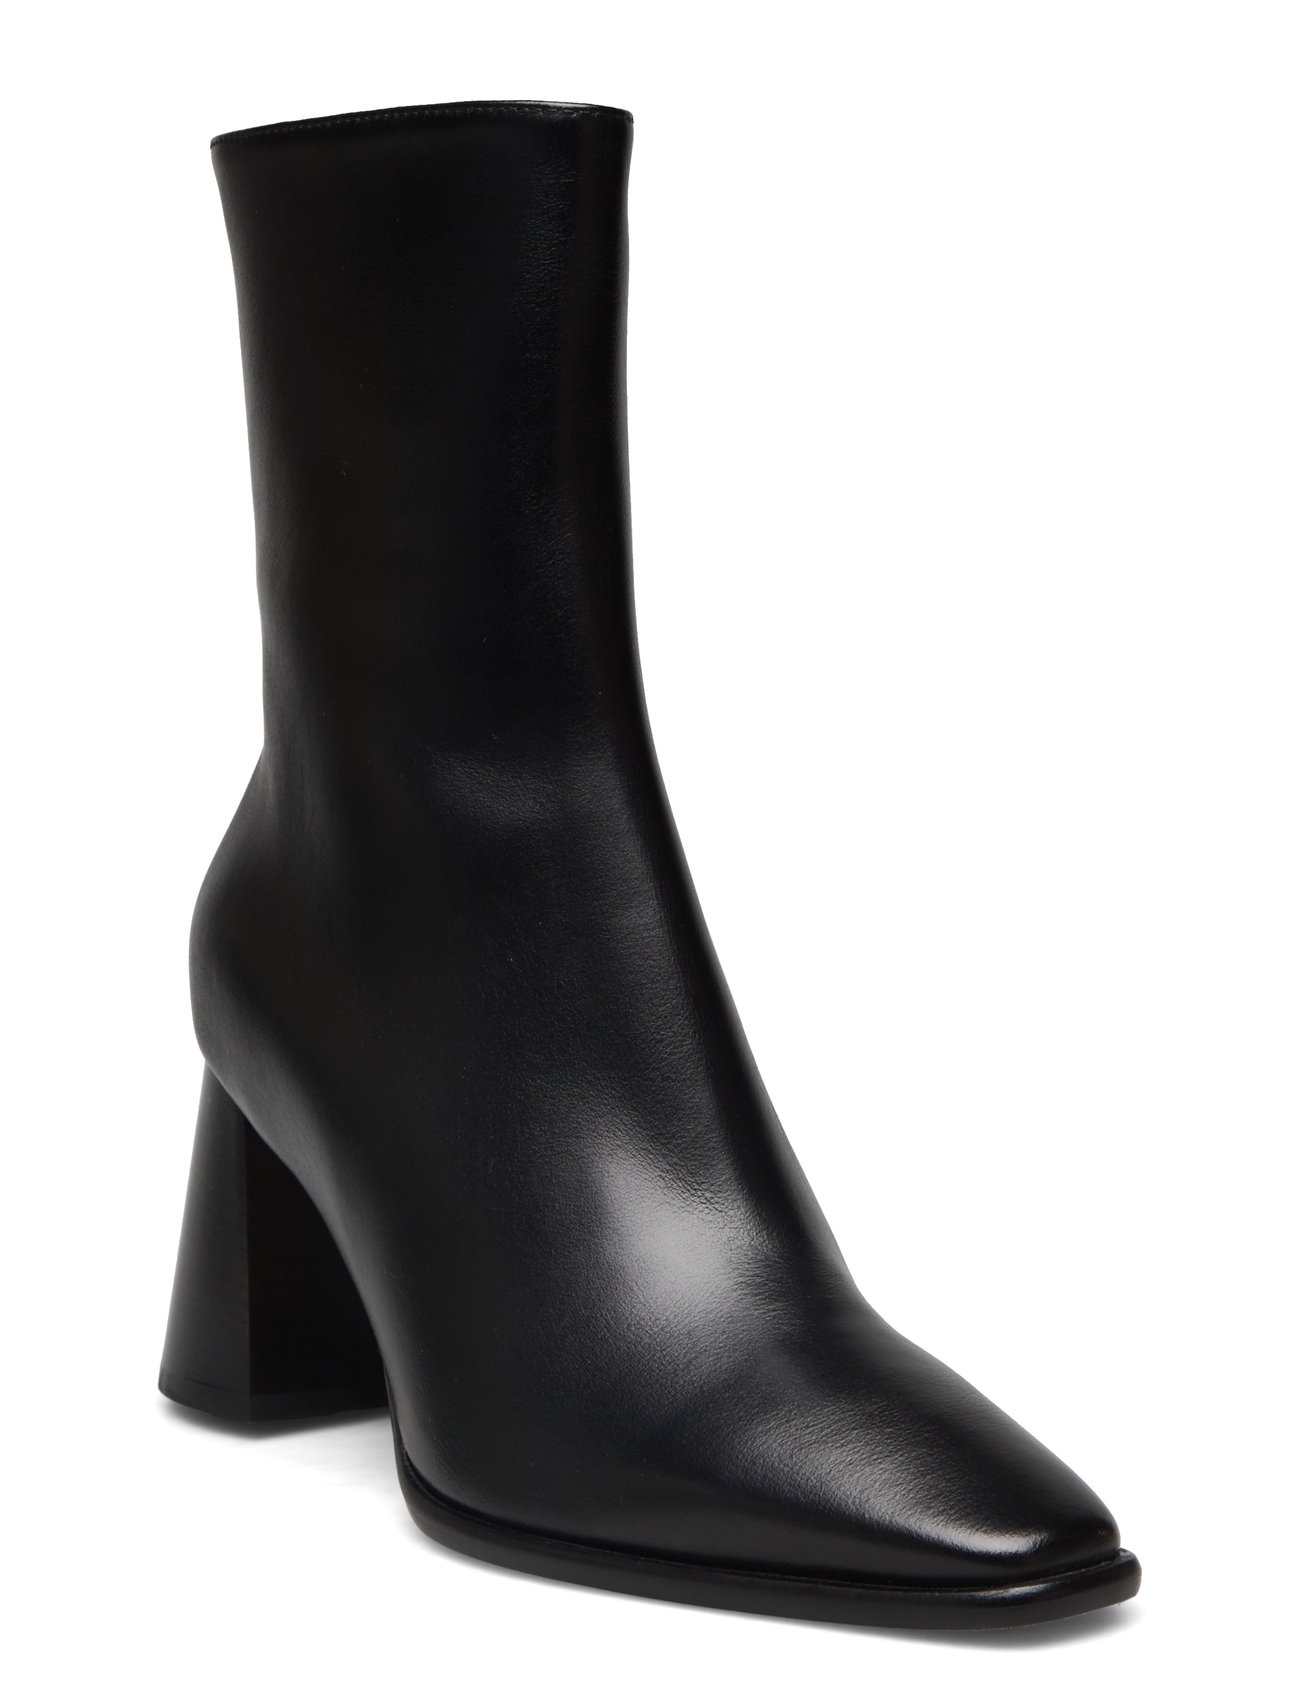 Hetti Boot Shoes Boots Ankle Boots Ankle Boots With Heel Black DEAR FRANCES